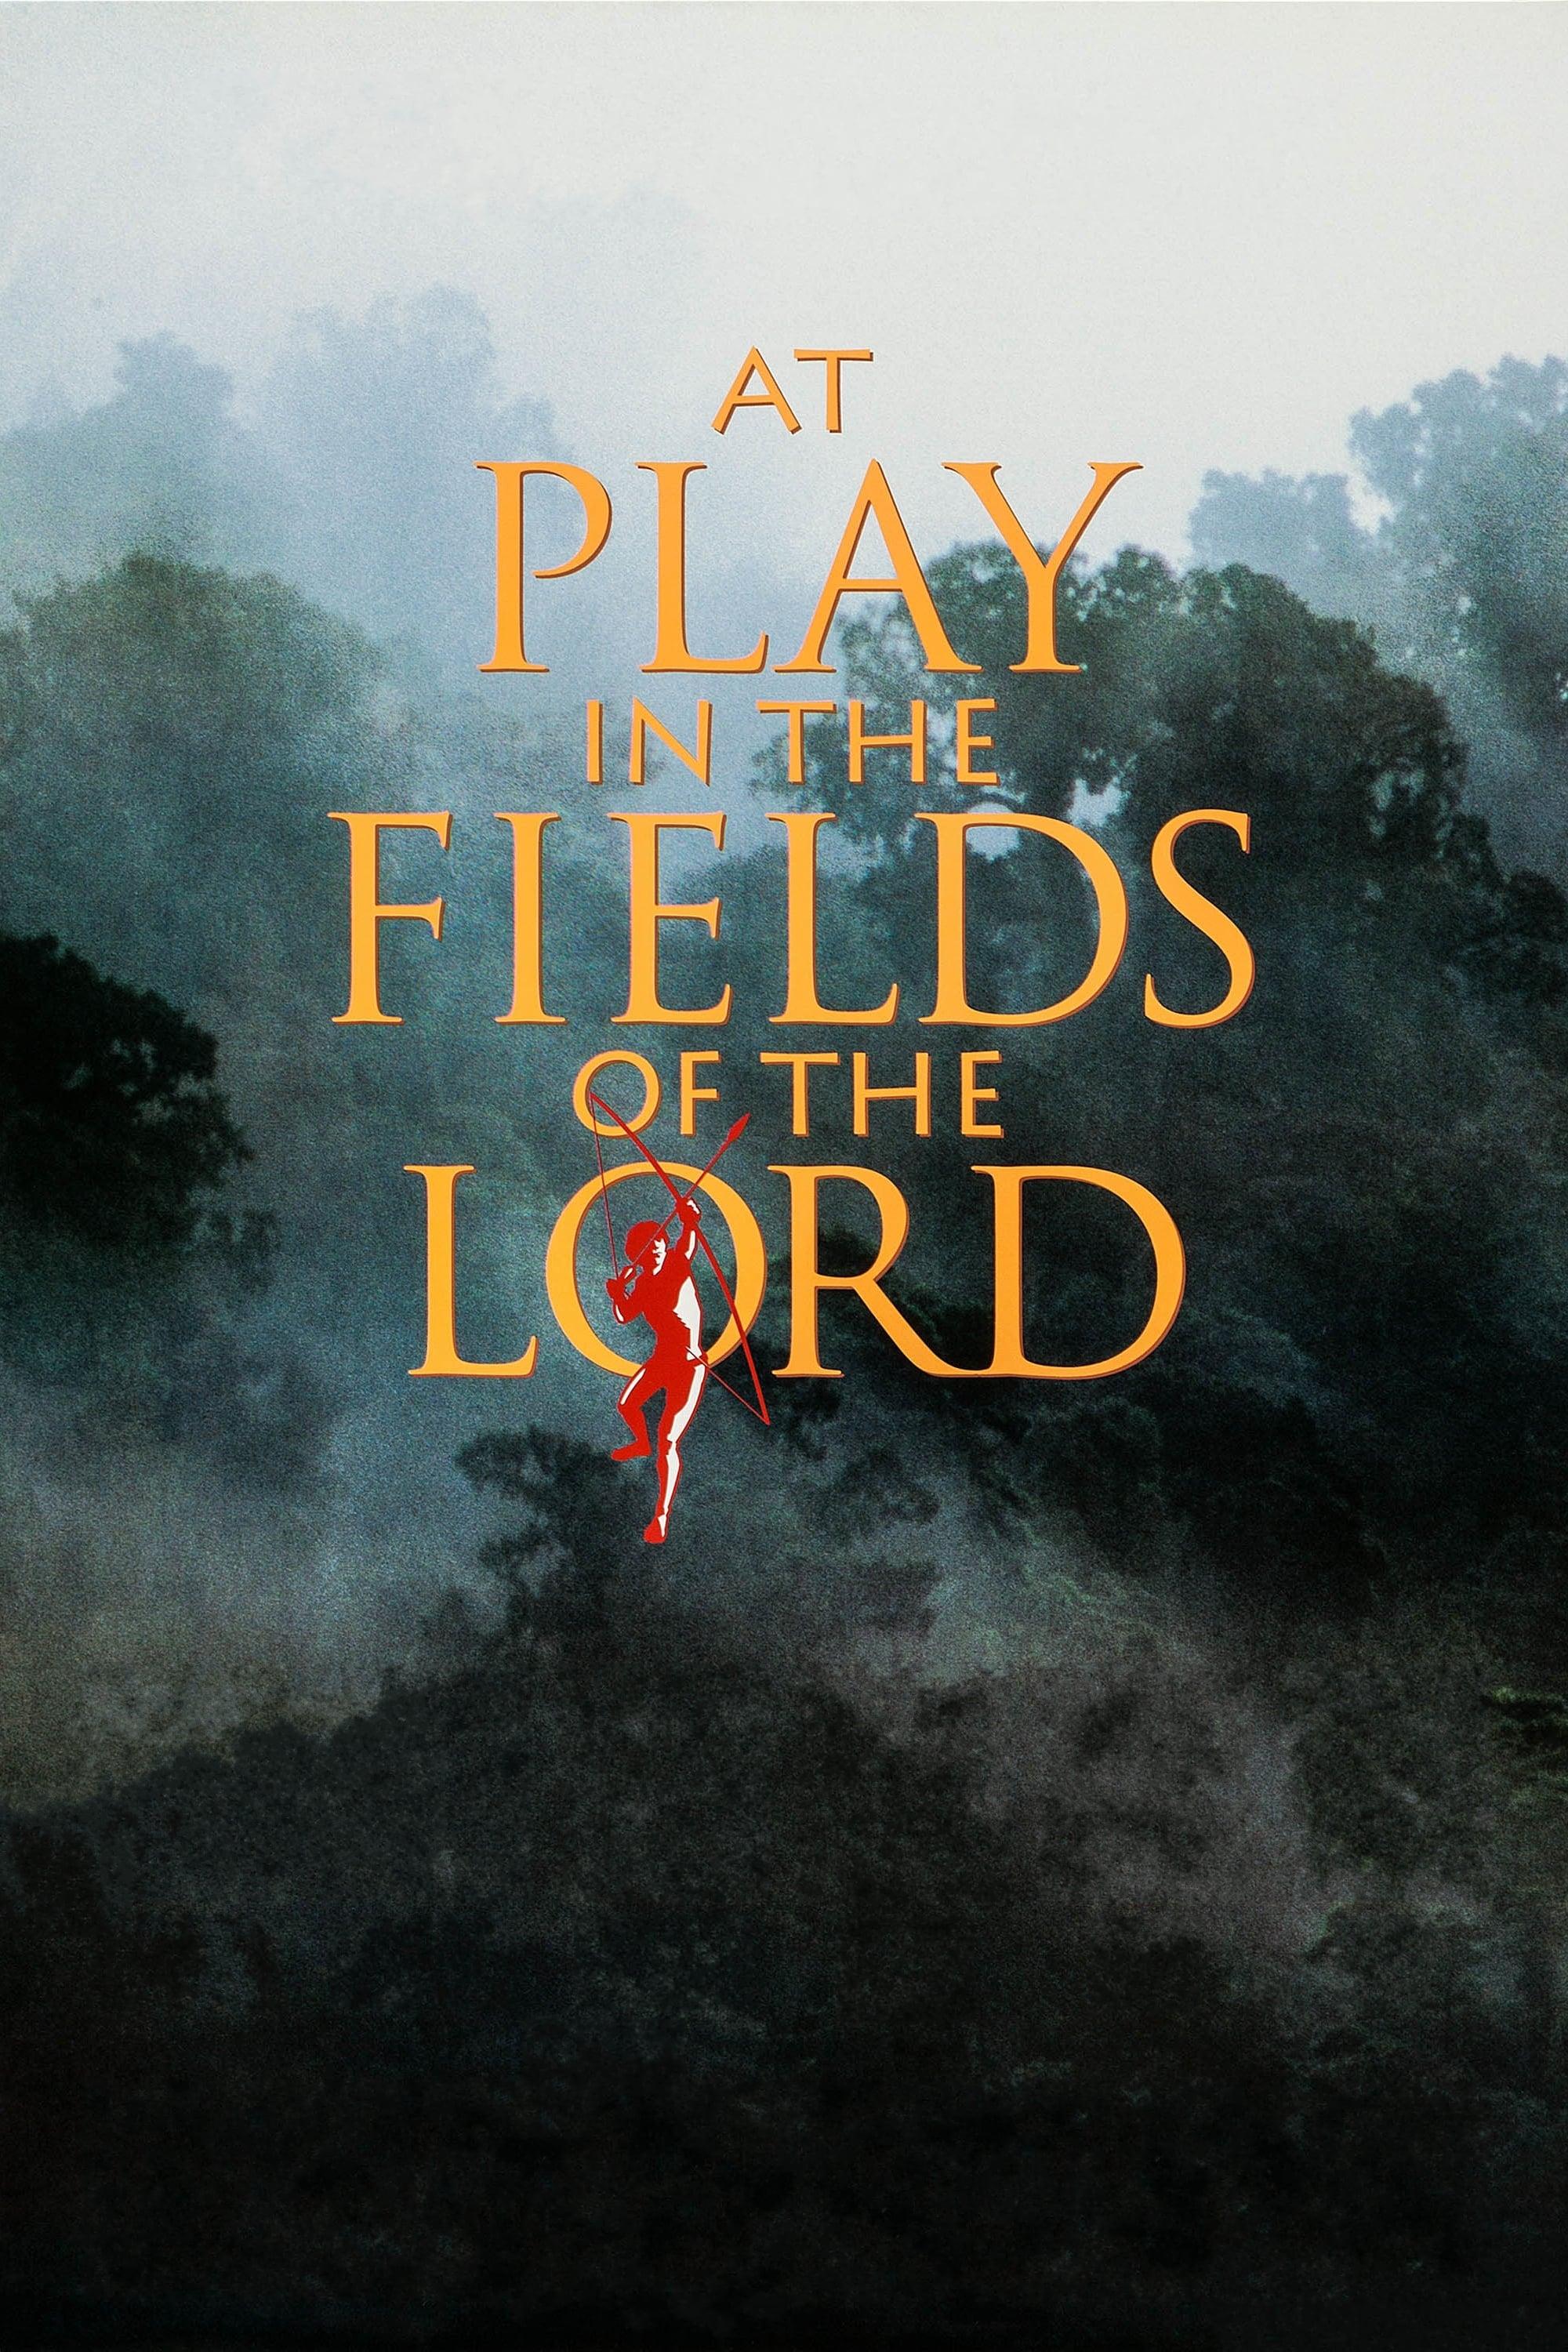 At Play in the Fields of the Lord poster